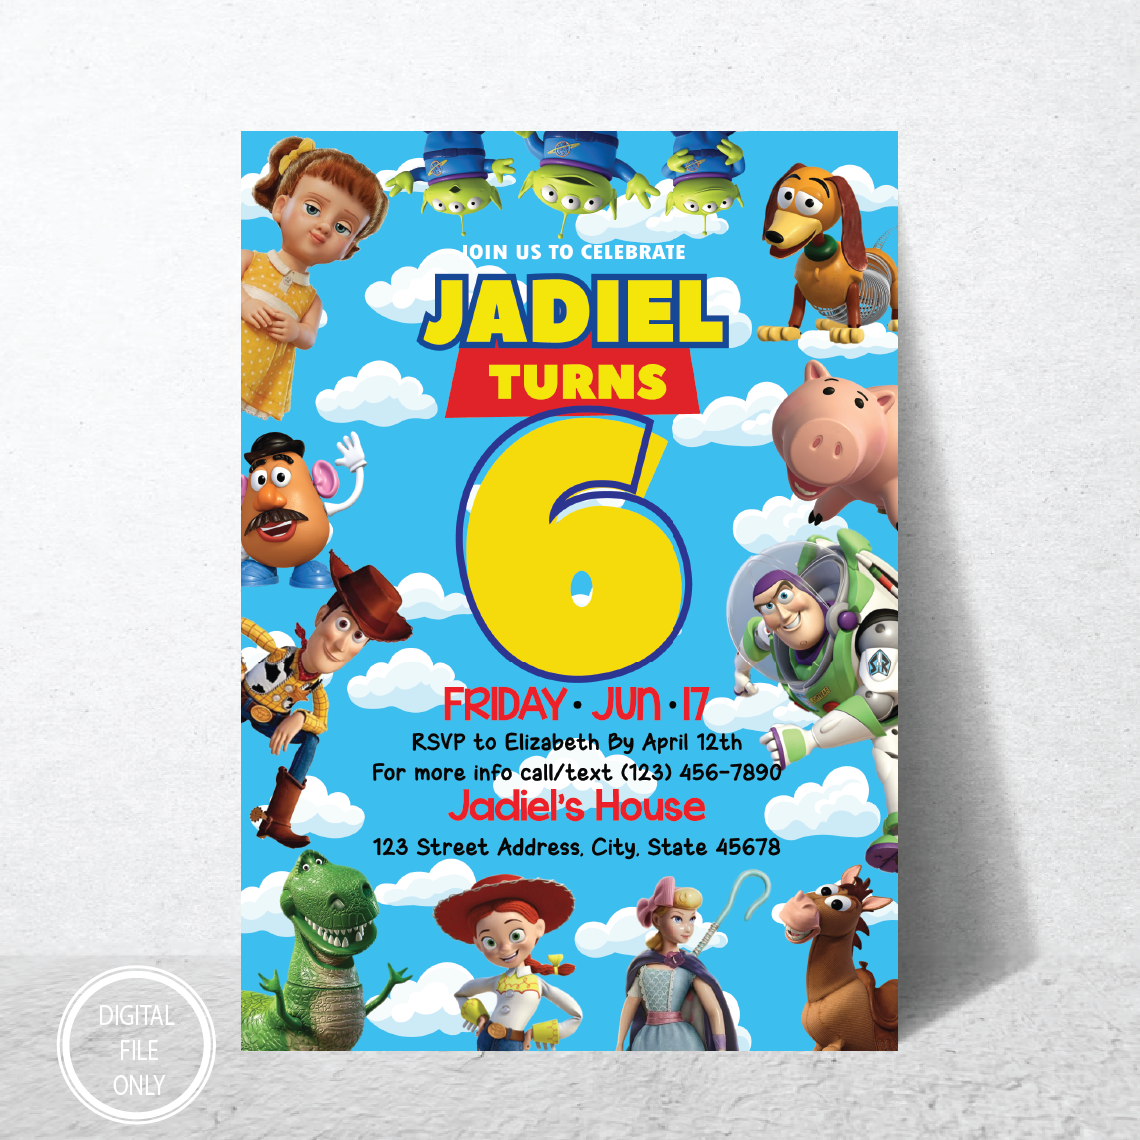 Personalized File Toy Story Invitation, Toy Story Birthday, Party Buzz Lightyear, Digital Printable 5x7, Woody Birthday Invite Card PNG File Only